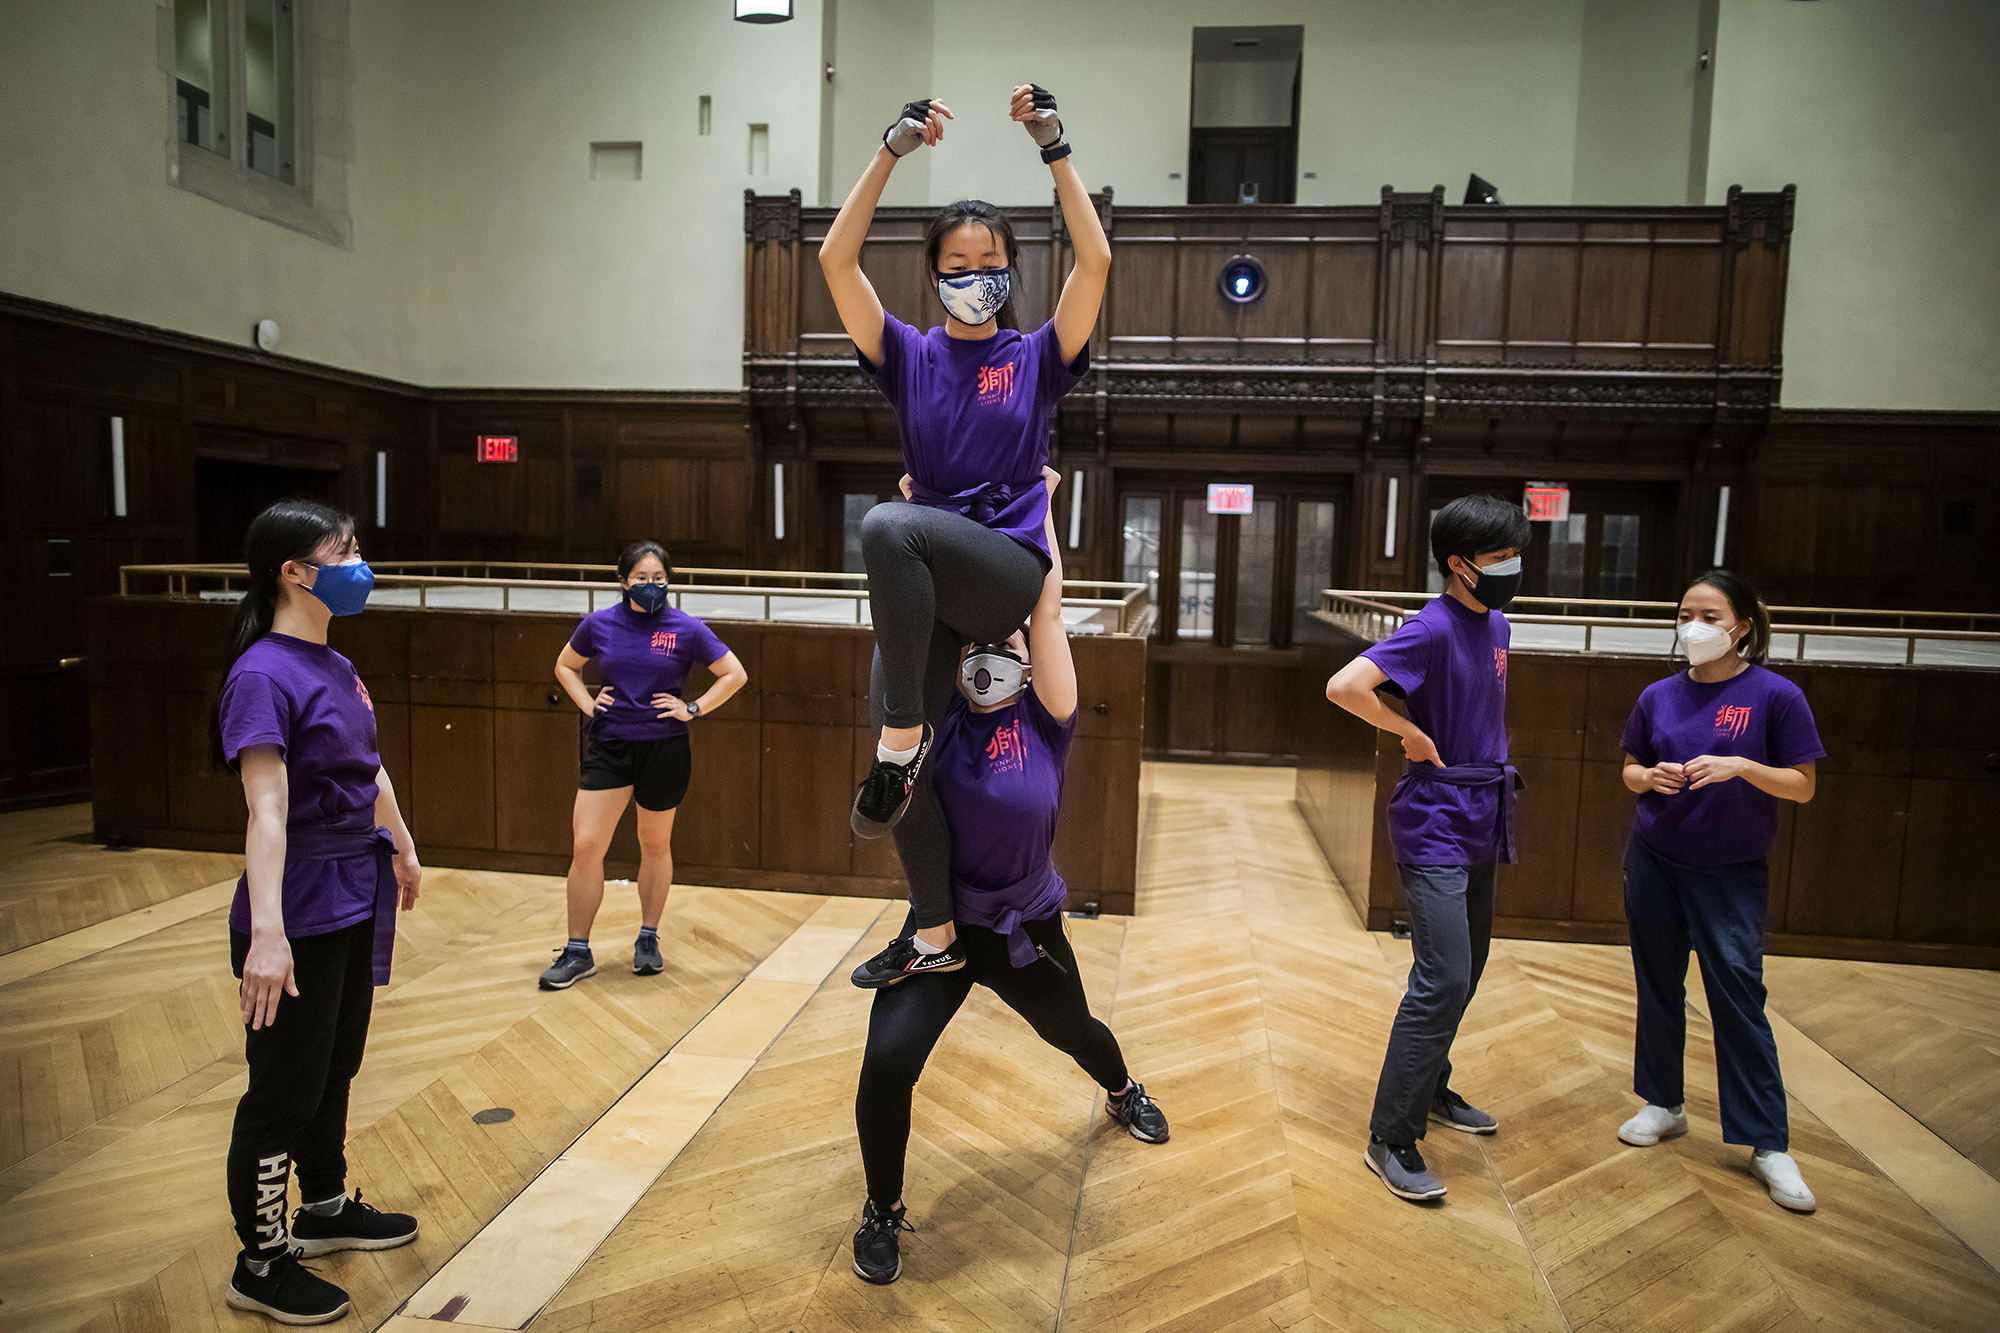 Three pairs of dancers are in identical purple shirts; the middle pair is practicing a "stack," with one dancer perched on top of another's head. The raised dancer has her arms up, pretending she is holding the lion head.